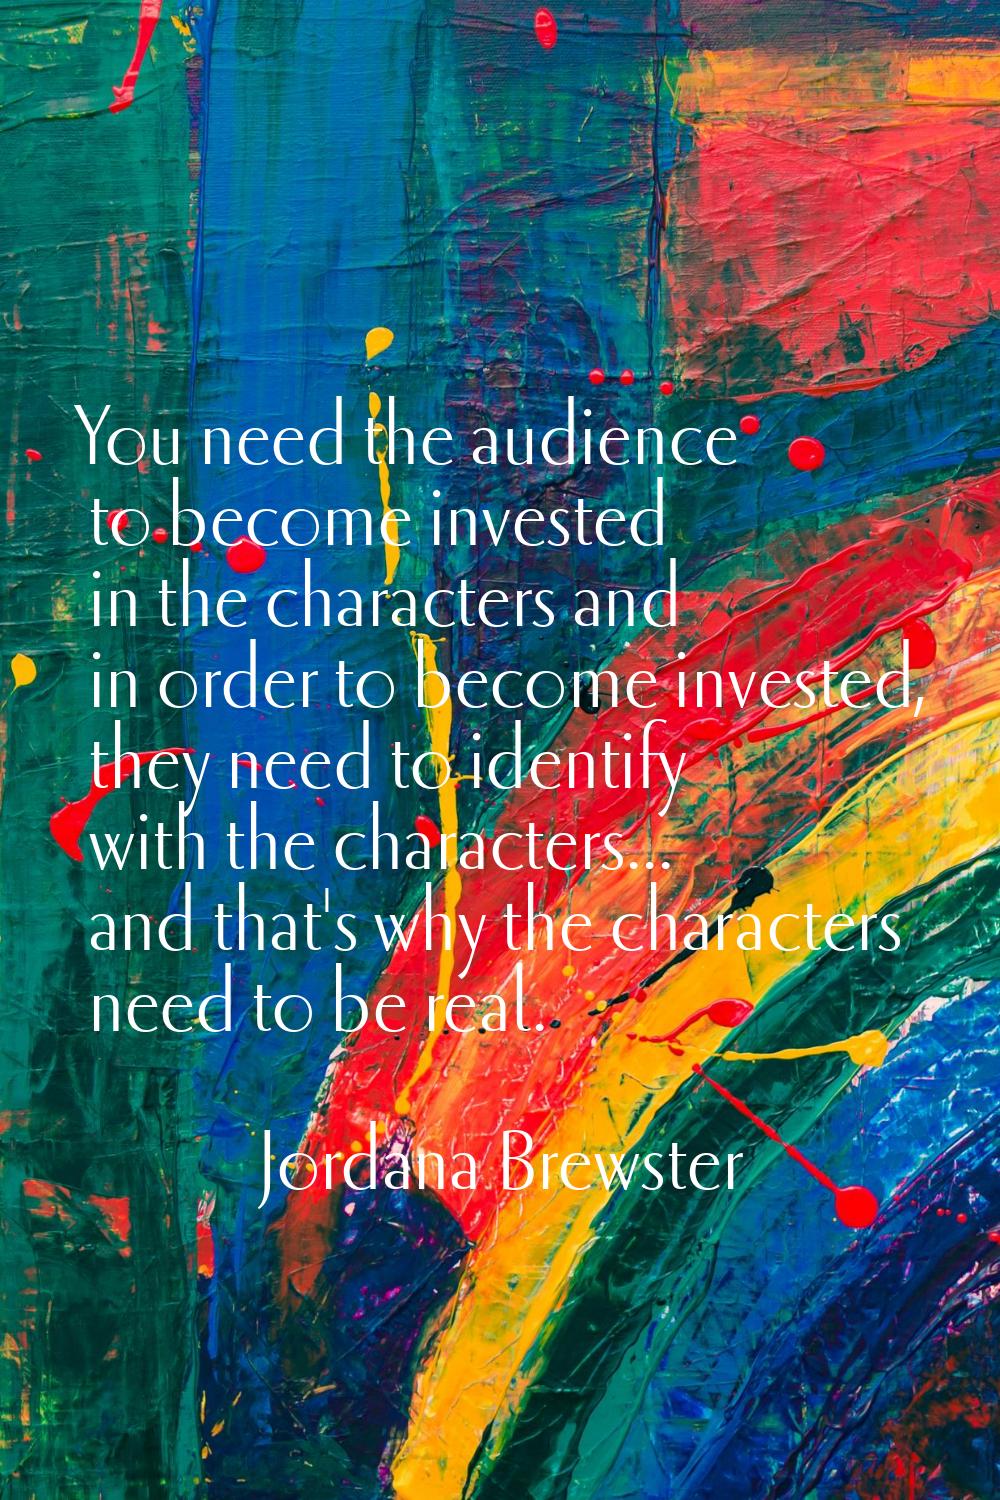 You need the audience to become invested in the characters and in order to become invested, they ne